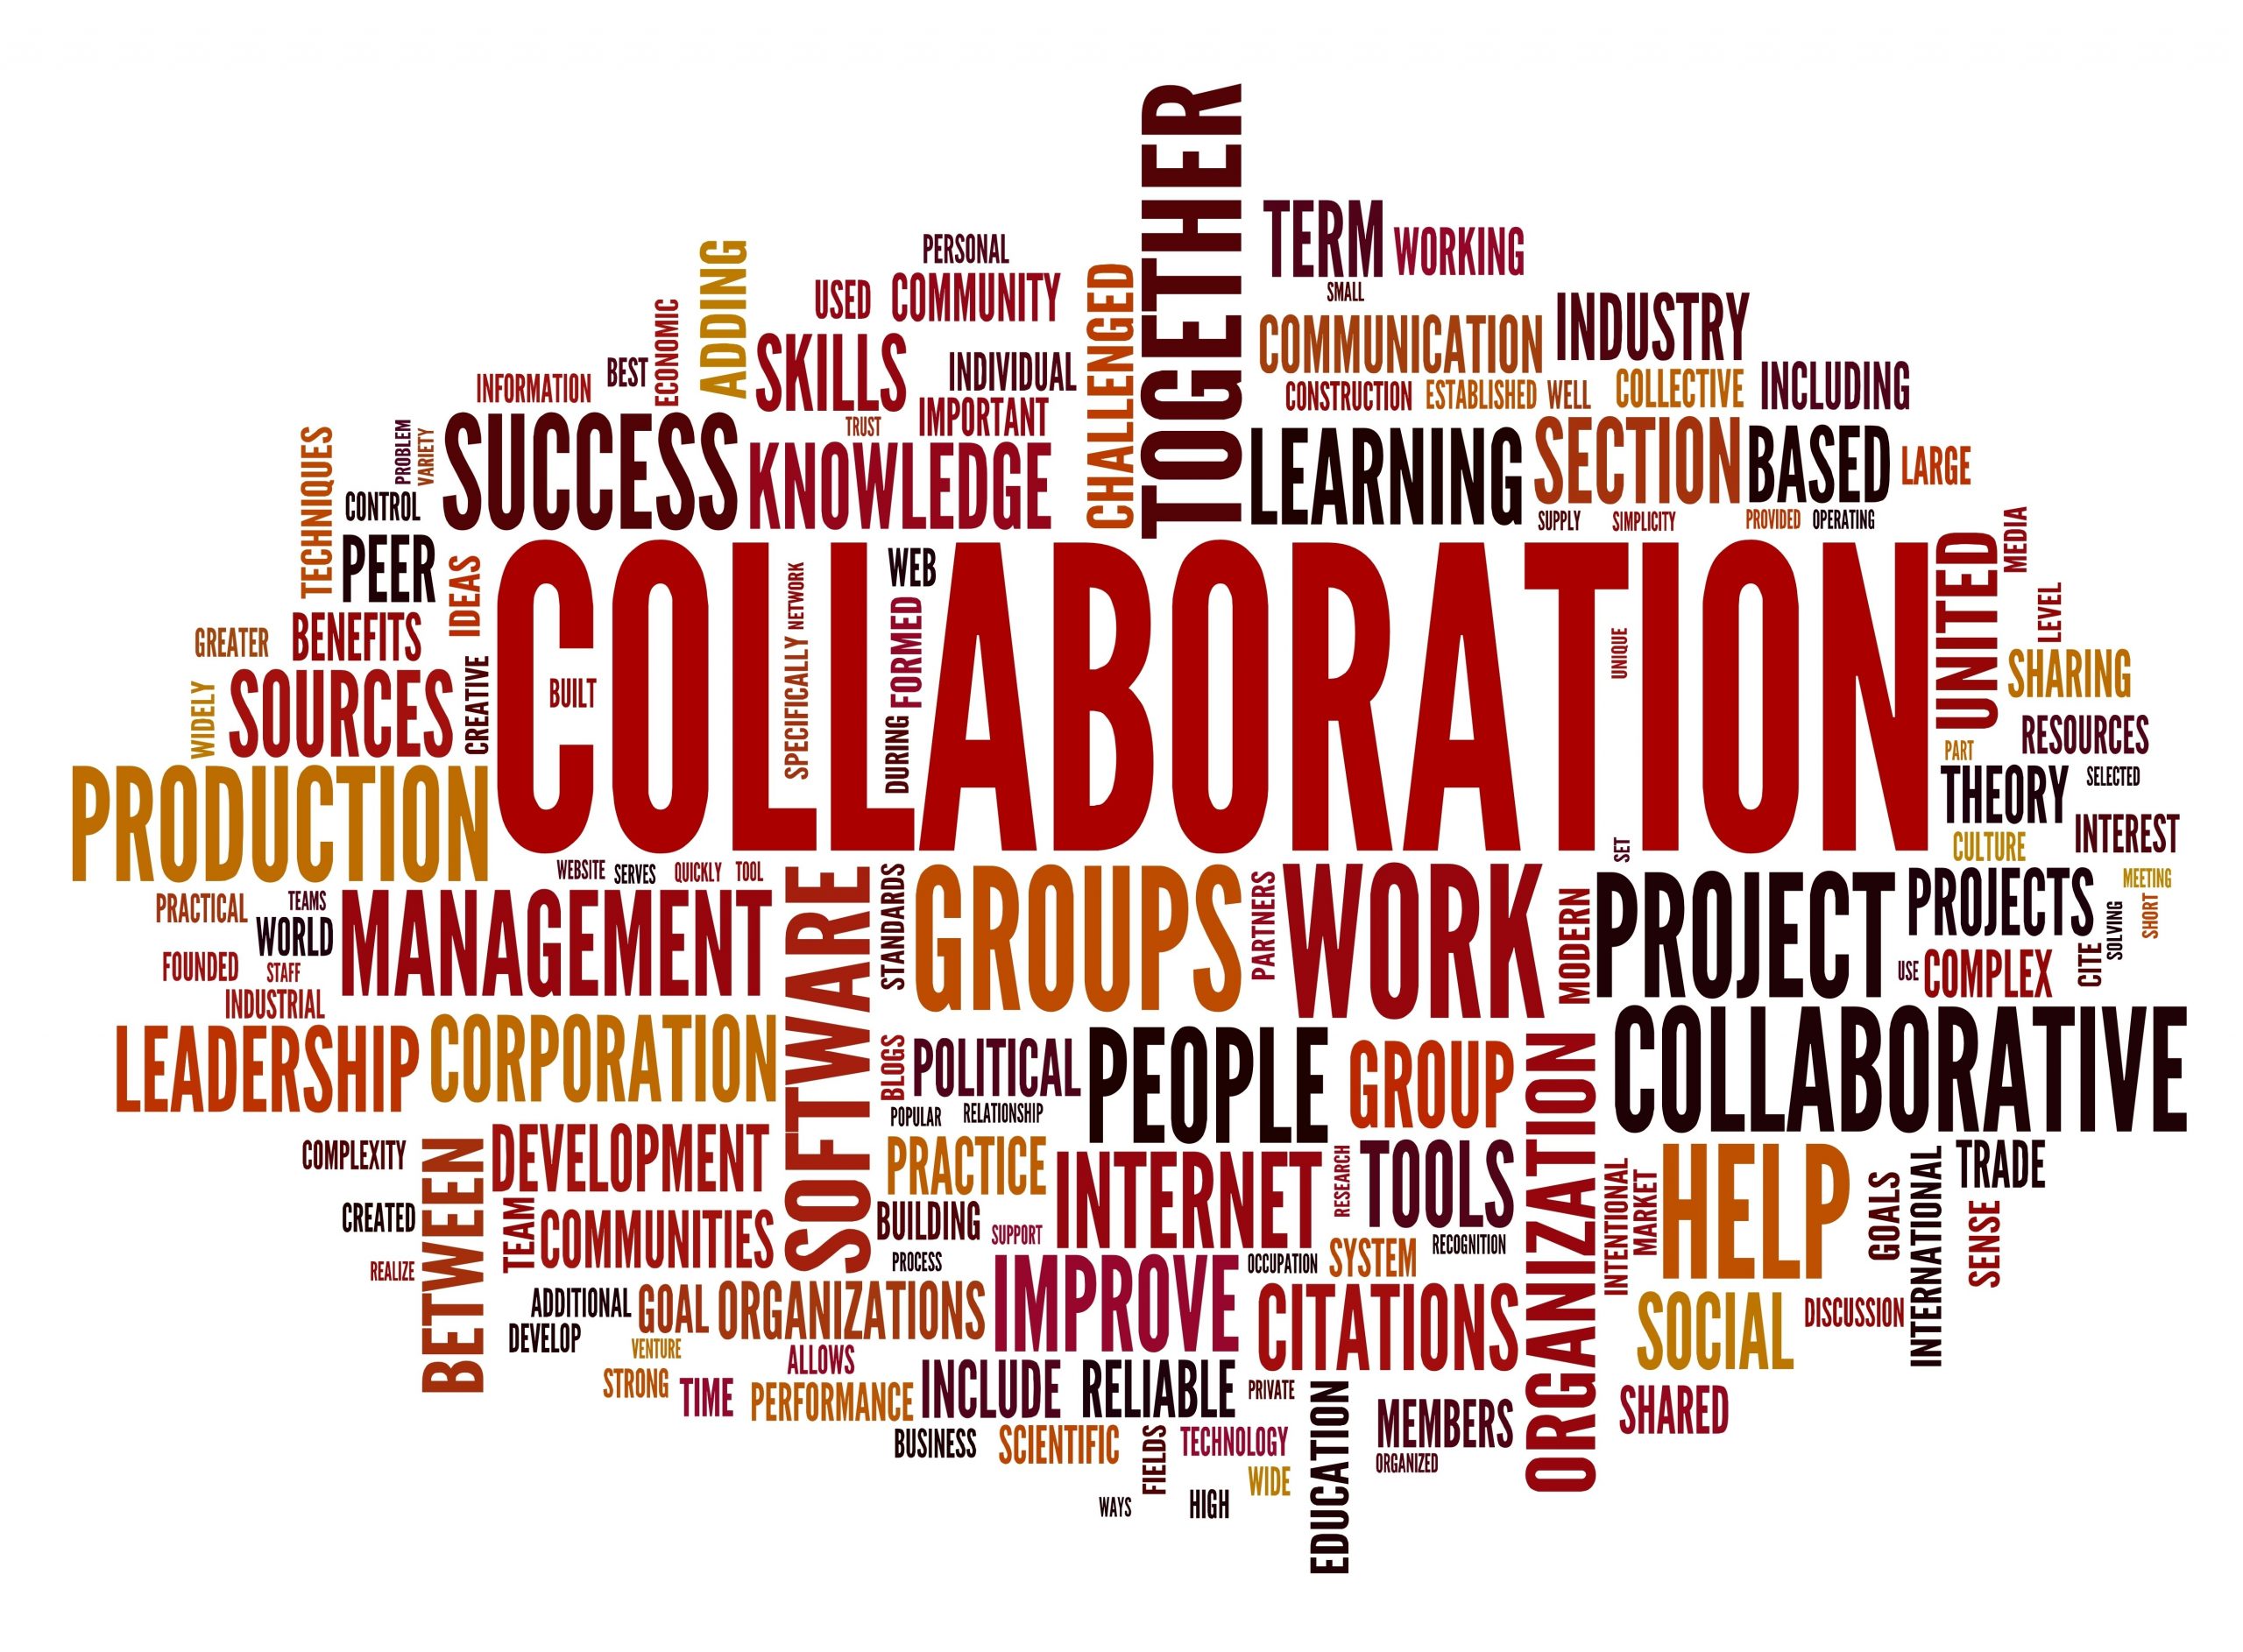  A word cloud image with red and brown text on a white background. The words are related to collaboration, teamwork, and communication.